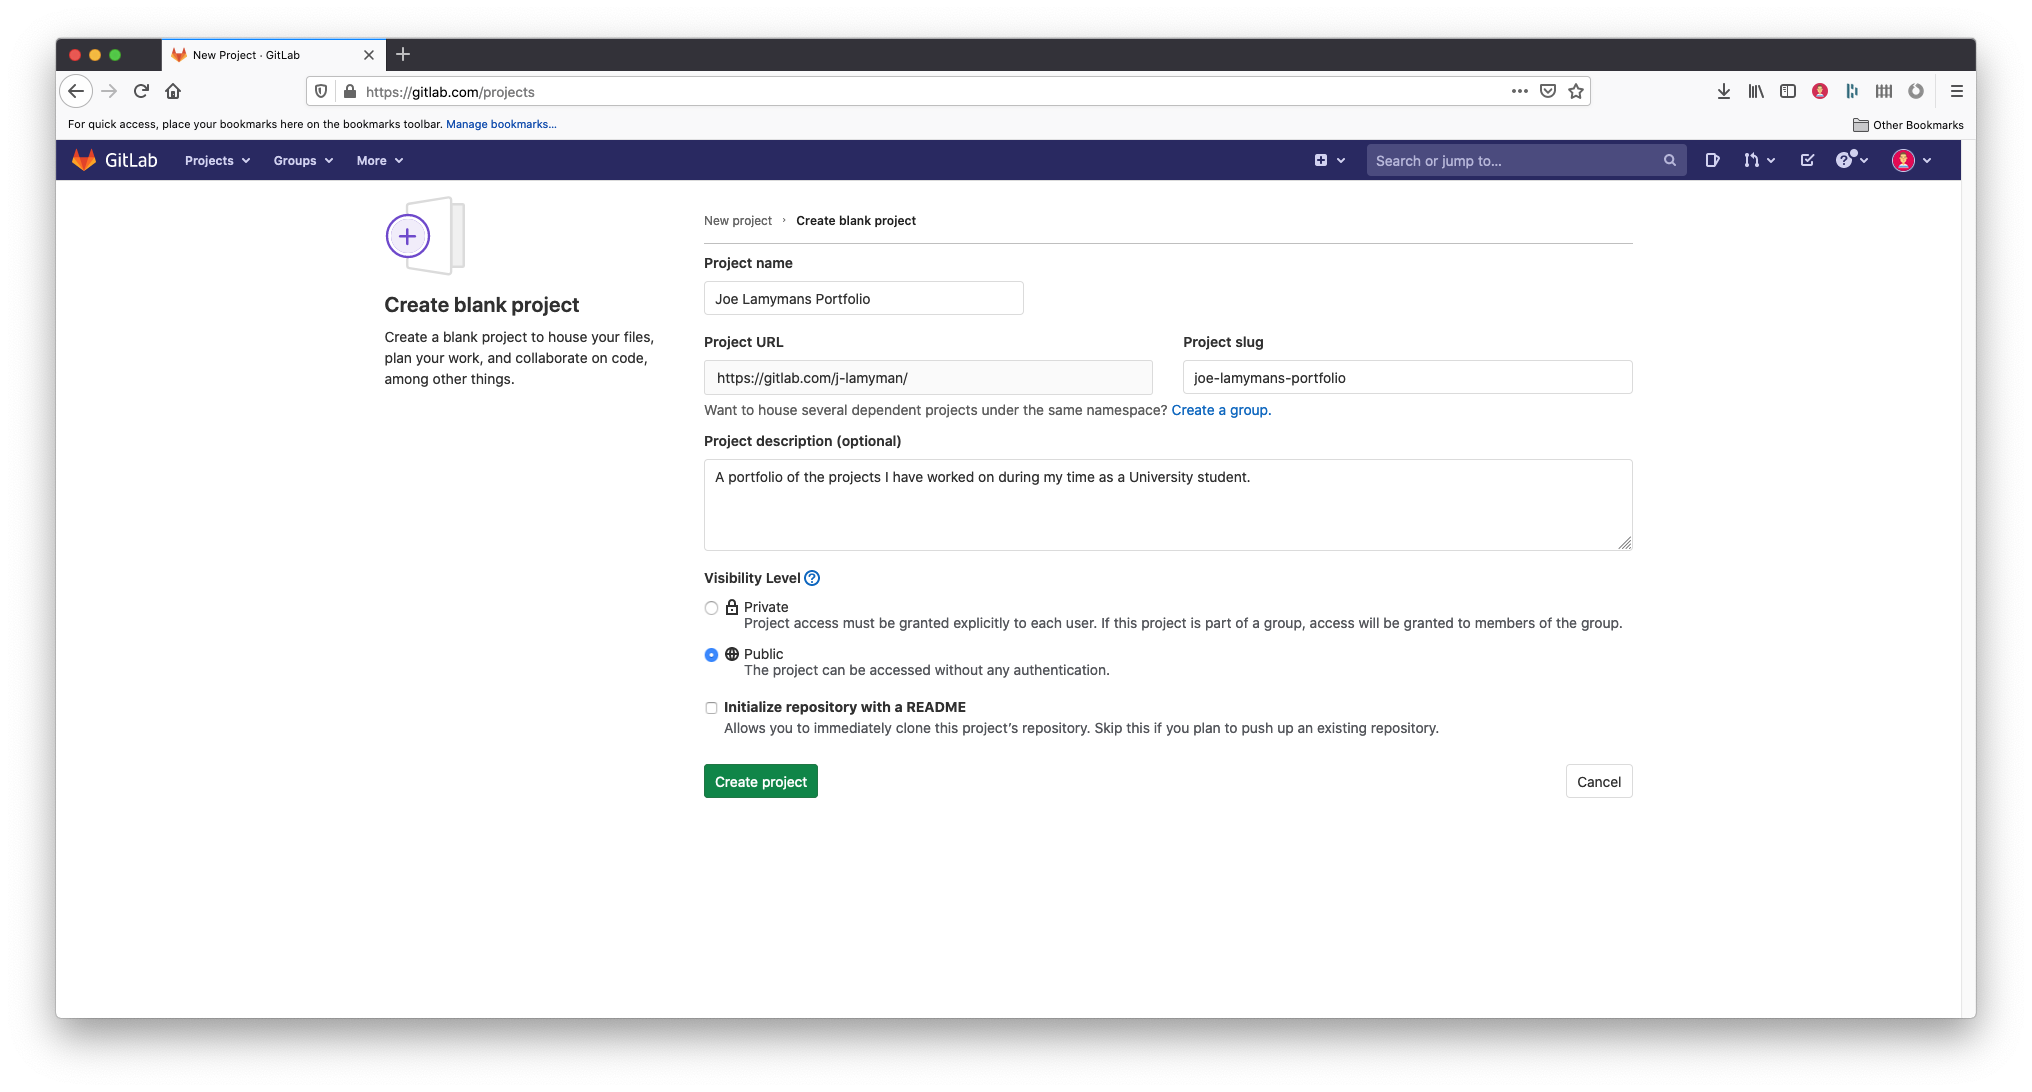 A screenshot of the Gitlab 'Create blank project' screen. The screen severak fields. The first, Project name, contains a text field within which I have entered 'Joe Lamymans Portfolio'. Next is the Project URL, I have left this as it was generated: https://gitlab.com/j-lamyman/. Next is the project slug, this is again automatically generated from the project name and as such is joe-lamymans-portfolio. Next, a text area labelled: Project description (optional). I have filled this with the text: A portfolio of the projects I have worked on during my time as a University student. Next, a fieldset of radio buttons. There are two options: Private and Public. The public radio button has been selected. Finally, the, 'Initialize repository with a README' checkbox remains unchecked. Below these fields is a button labelled, 'Create project'.